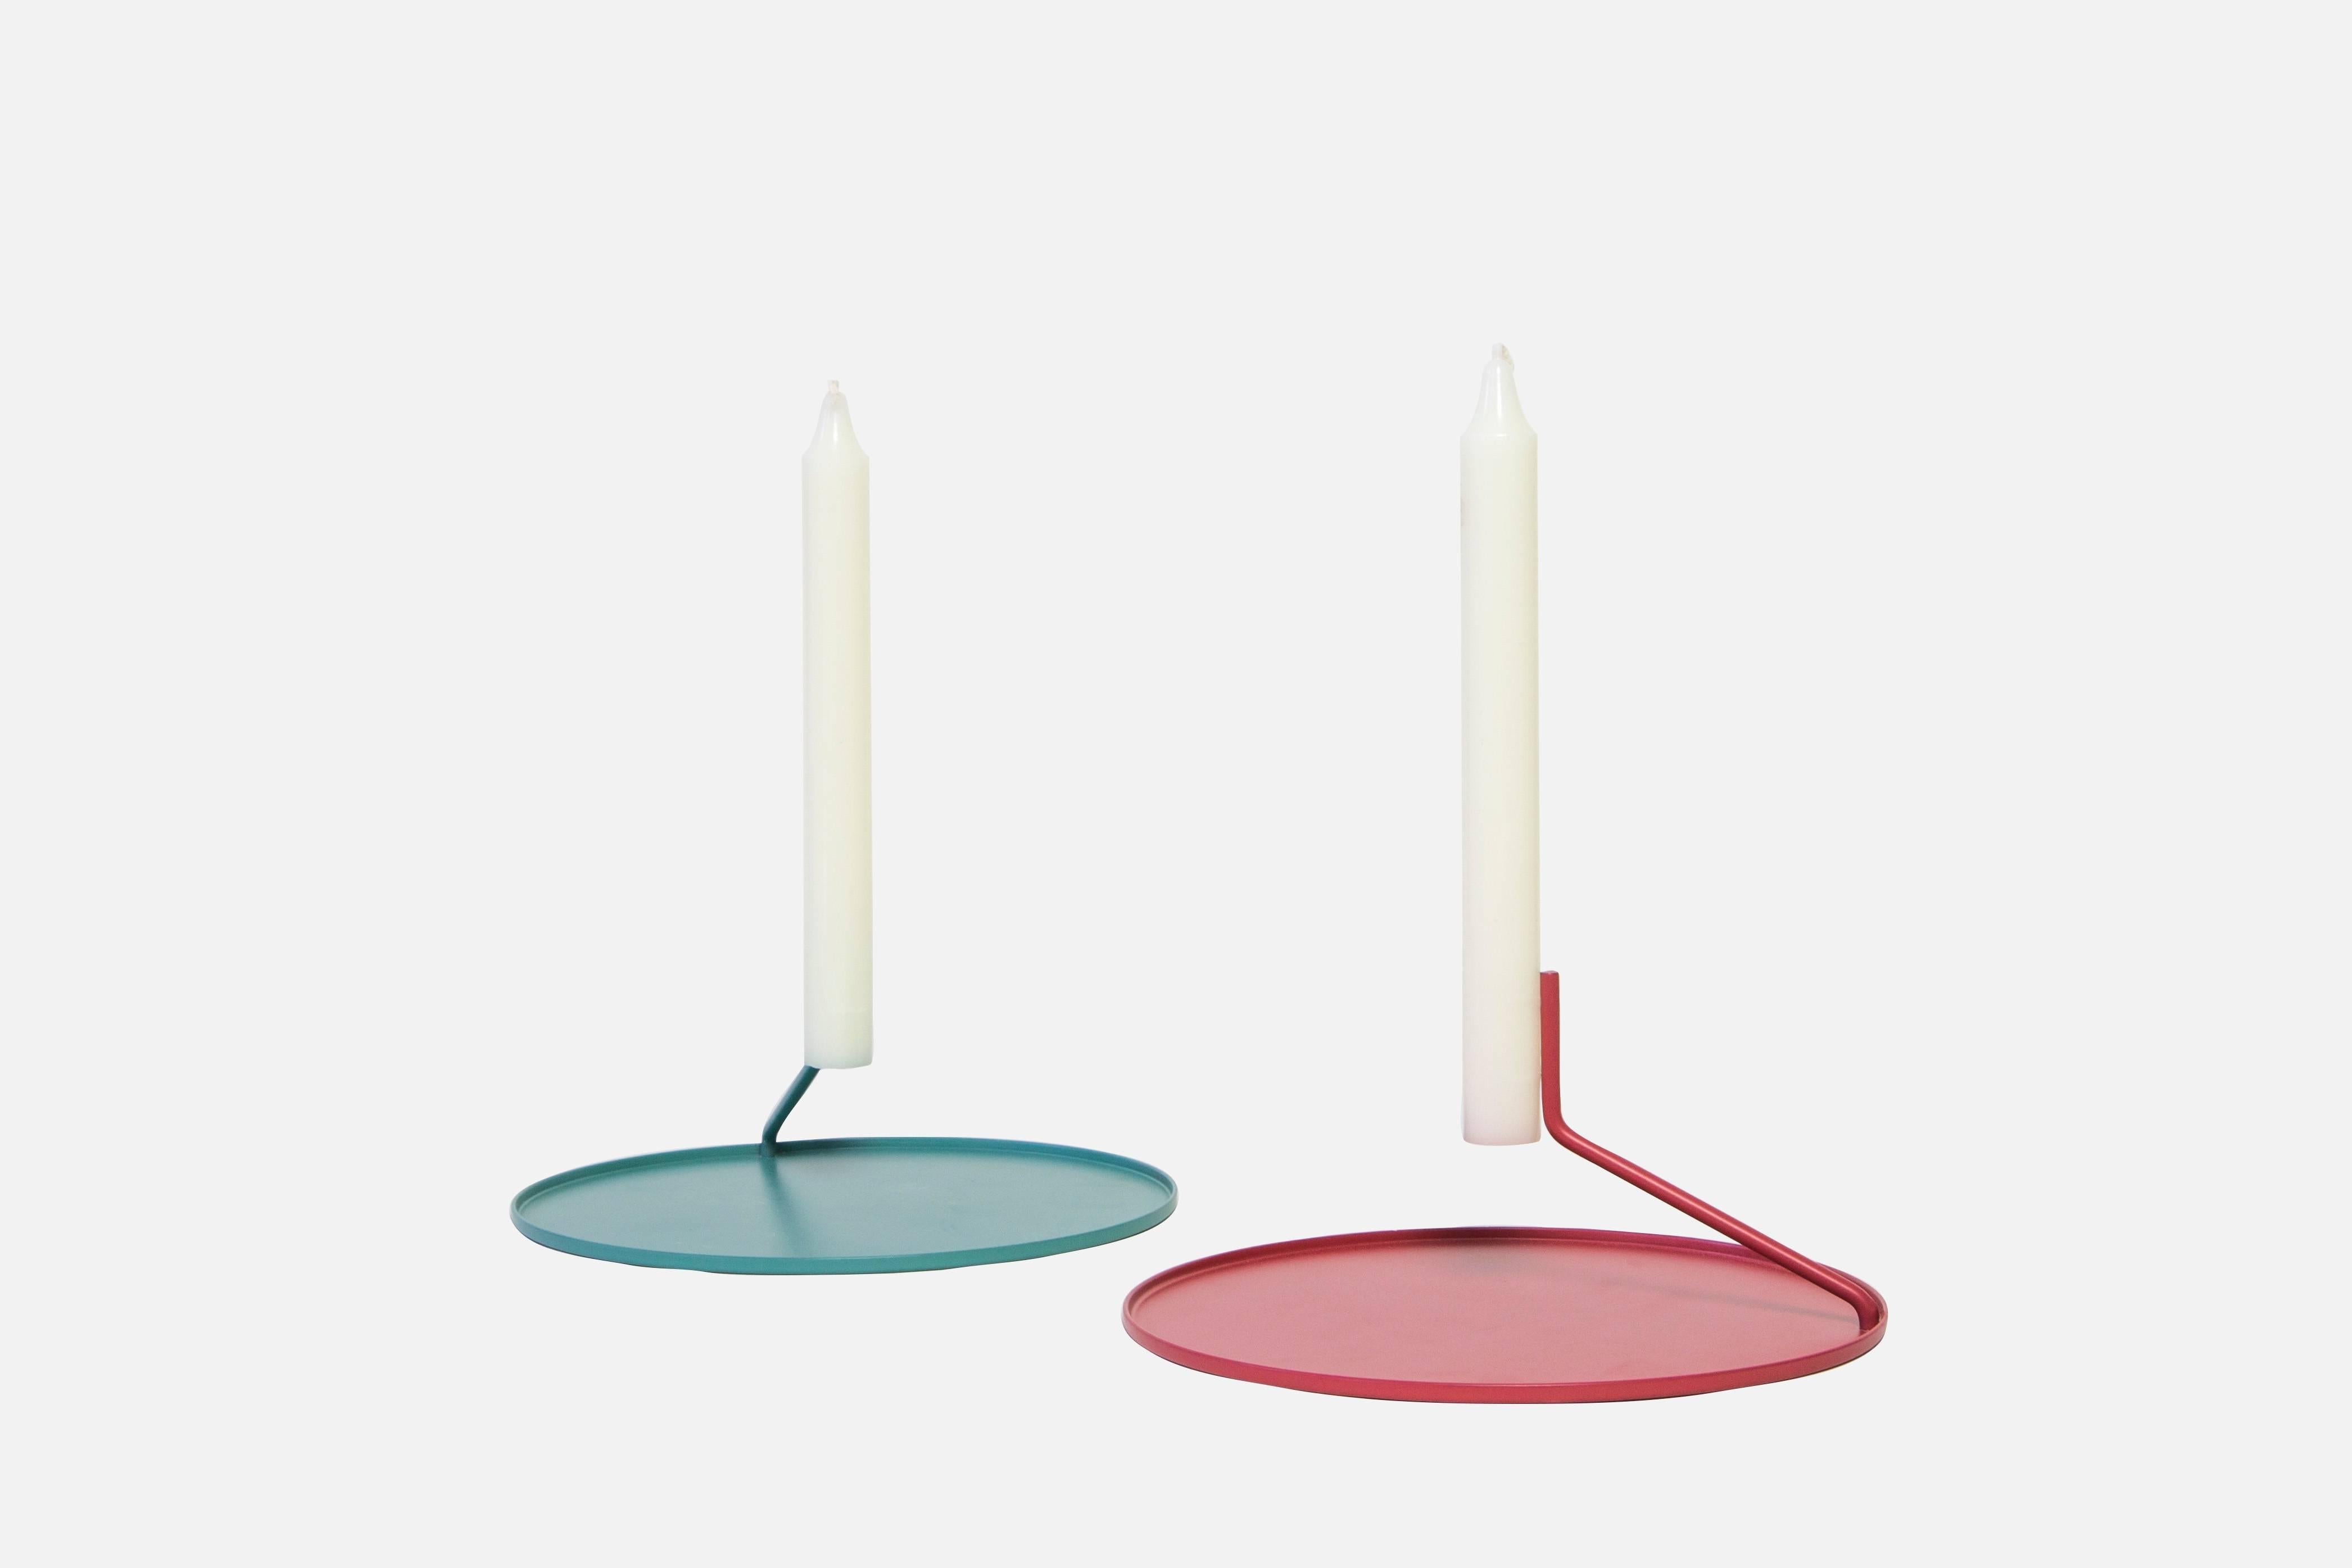 This listing includes our Buka candlestick in red with five white candles.

Simple, elegant and mysterious, the Buka candlestick uses two pins to suspend a candle above a metal dish - giving it the appearance that it's levitating. Minimal, yet